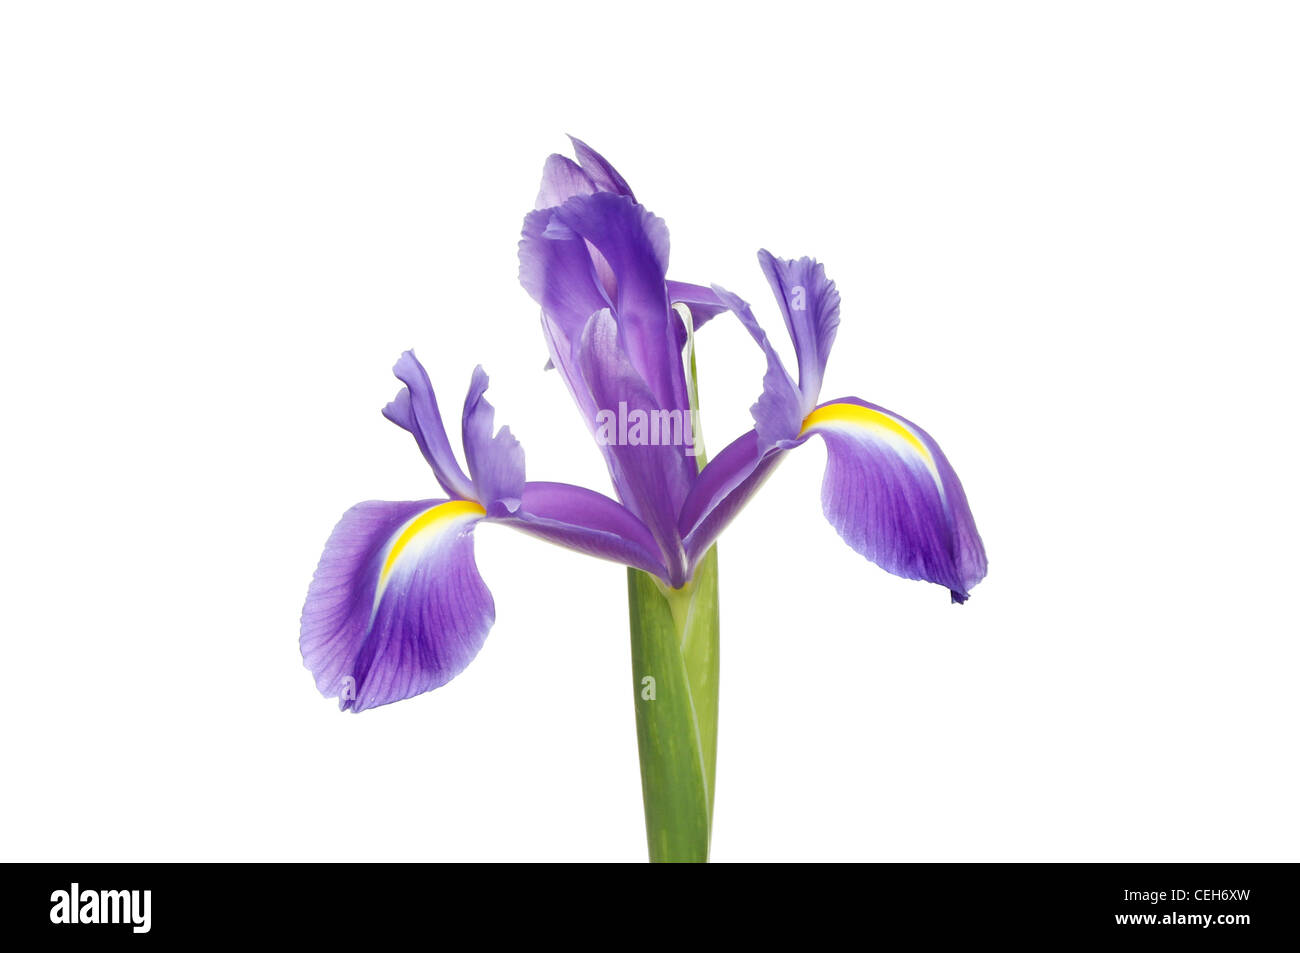 Blue and yellow iris flower isolated against white Stock Photo